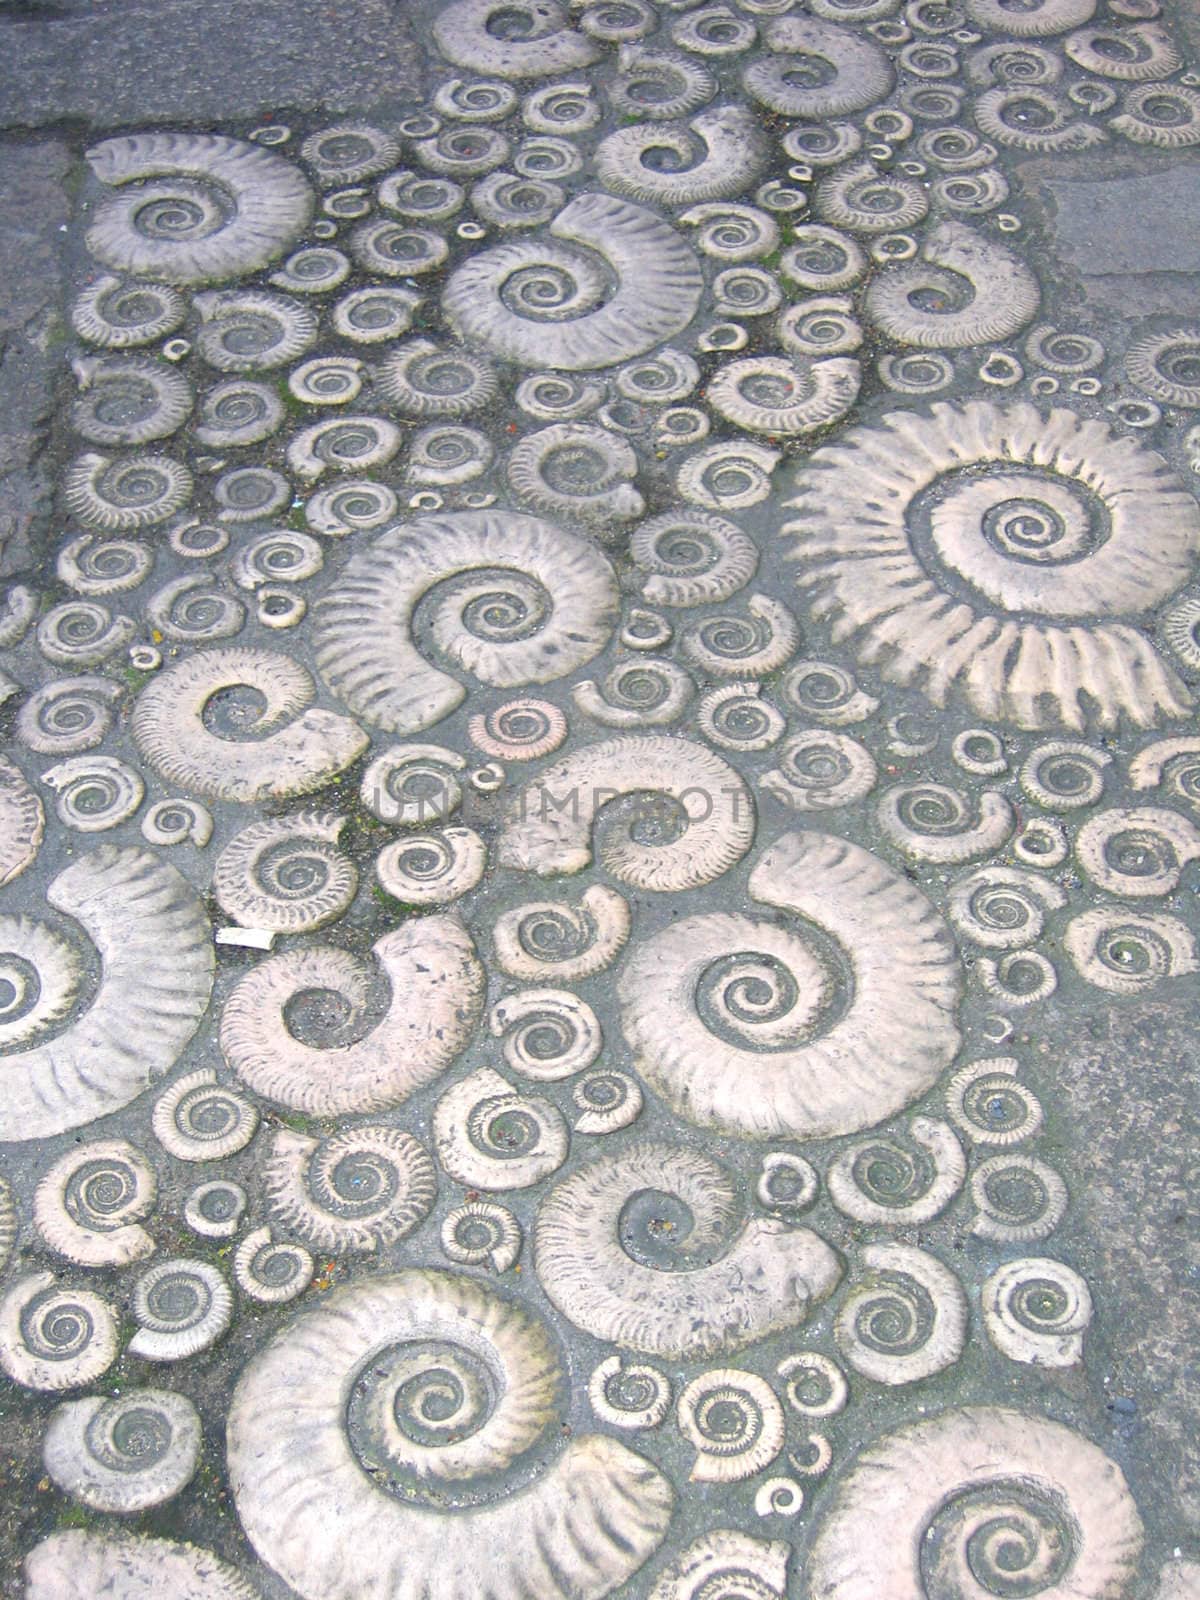 Walkway Made of Fossil Imprints